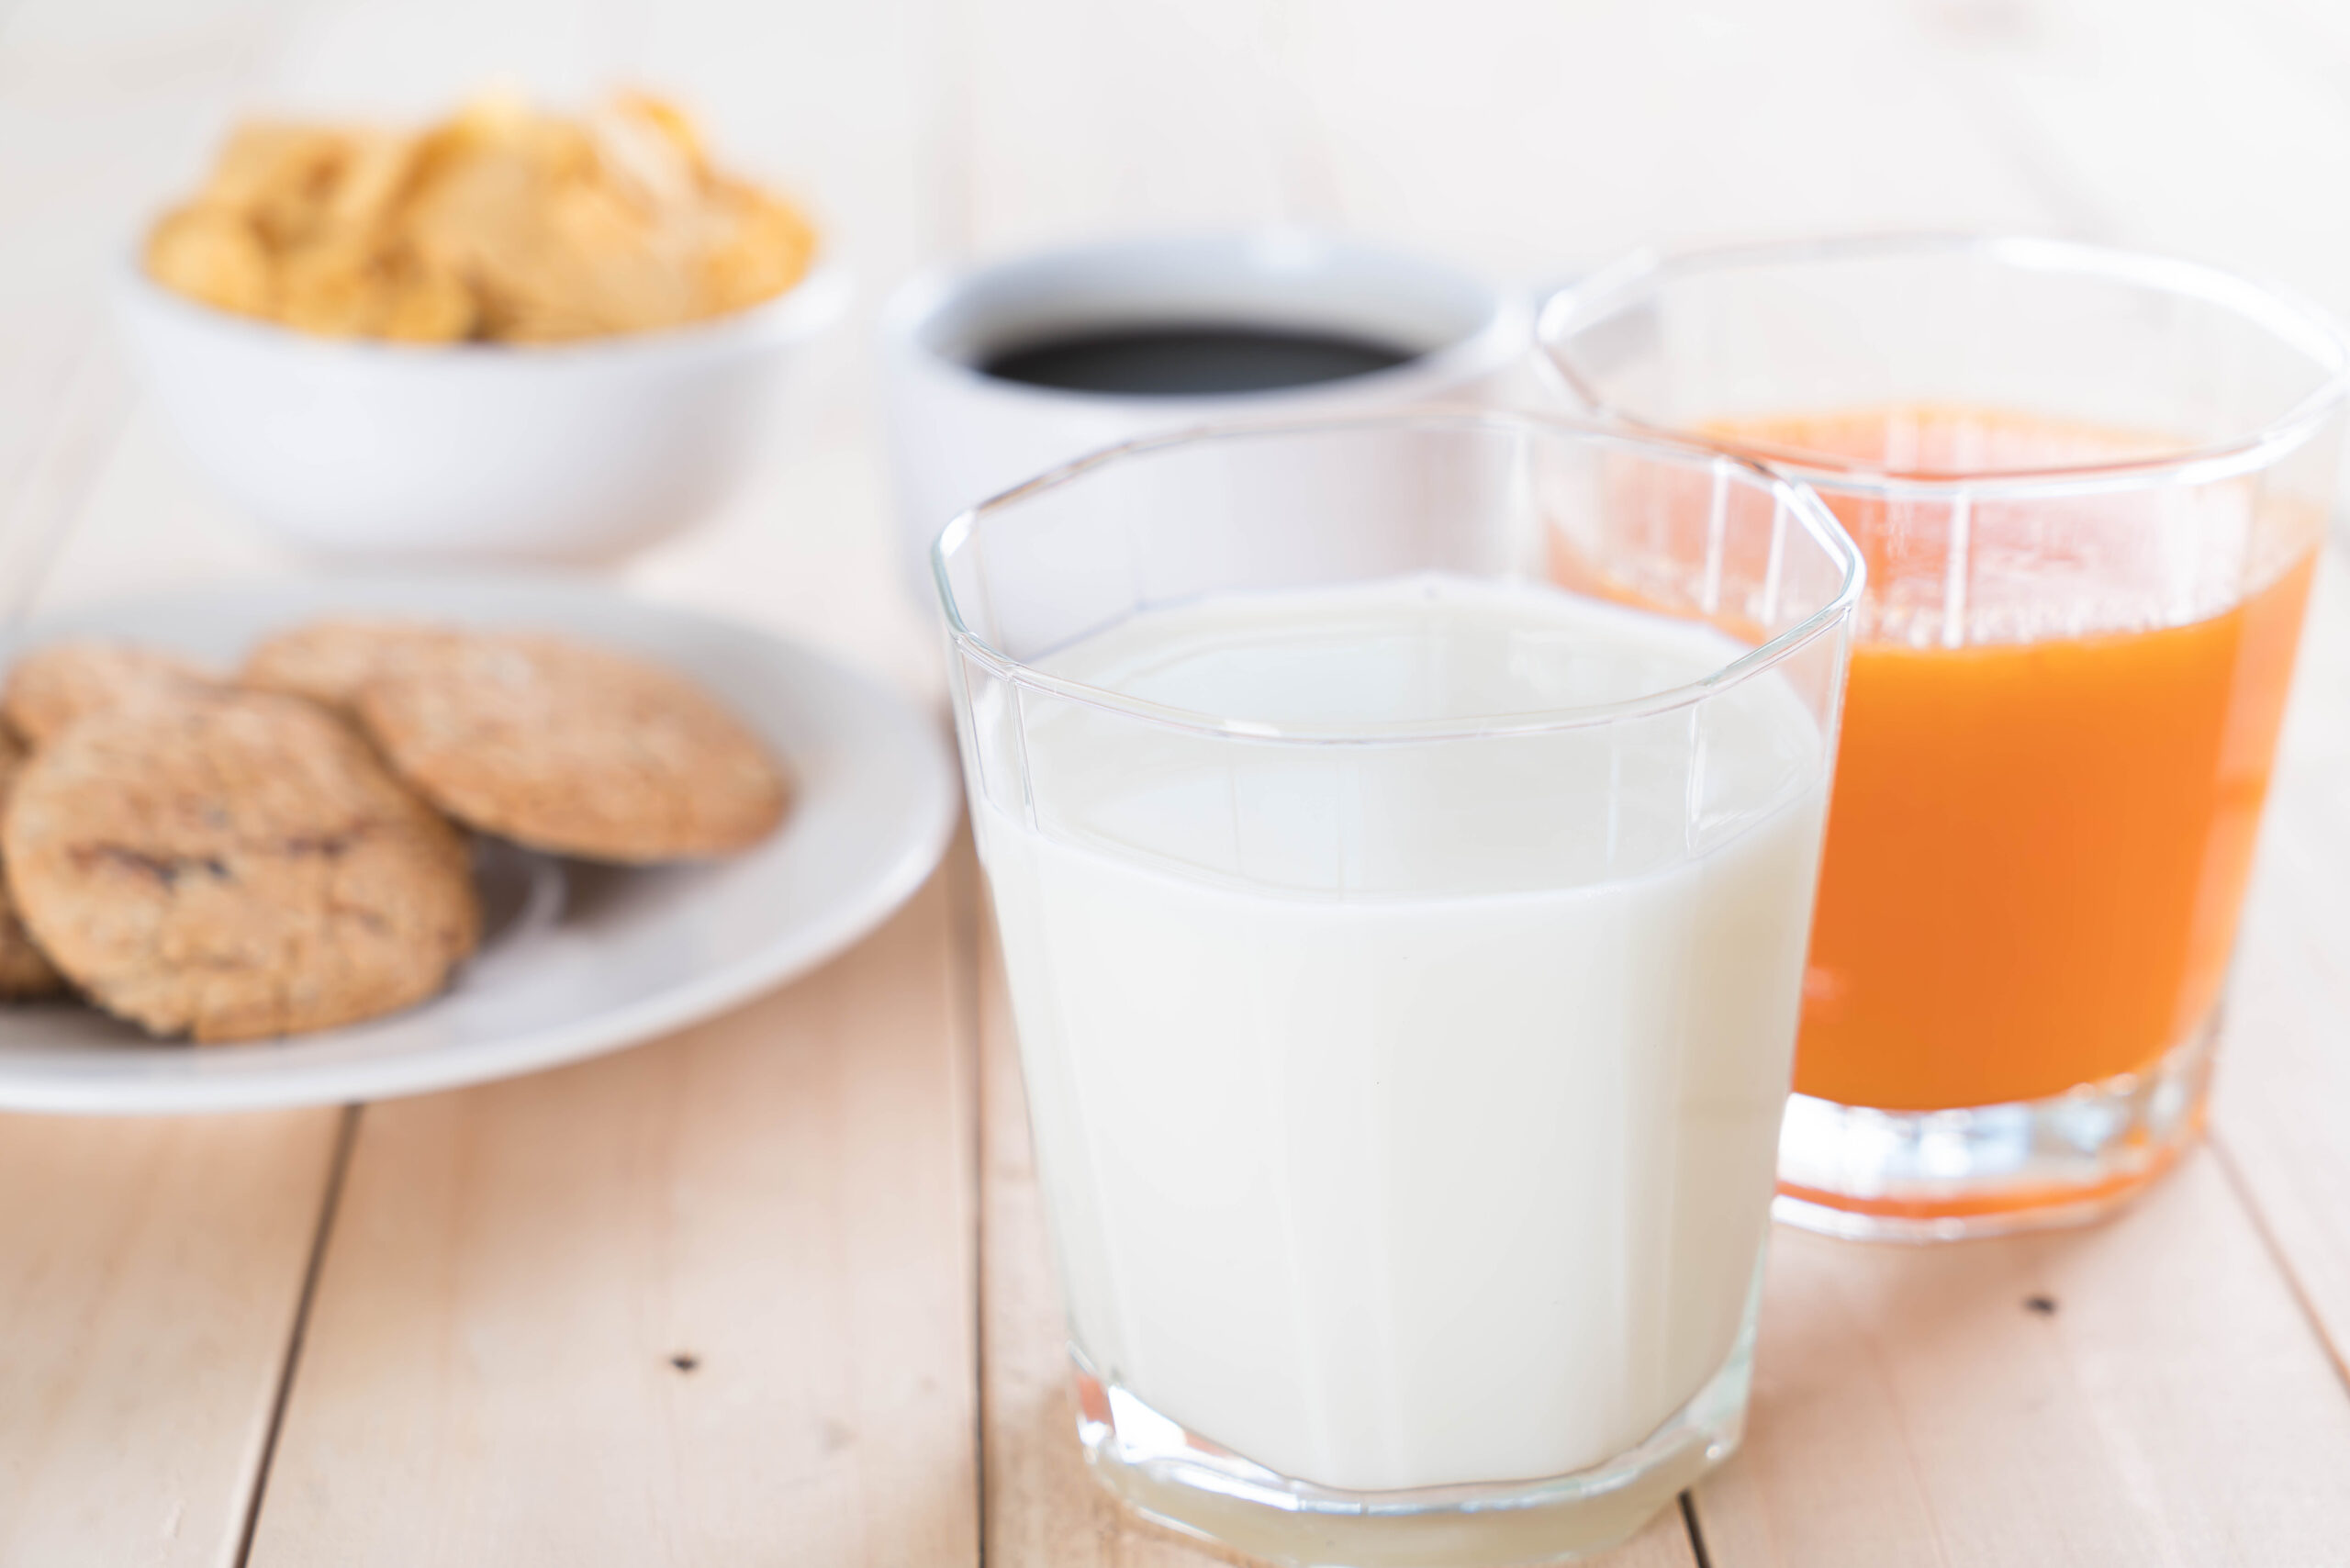 Study Finds Unsafe Levels of Toxic Metals in Fruit Juices and Non-dairy Milks